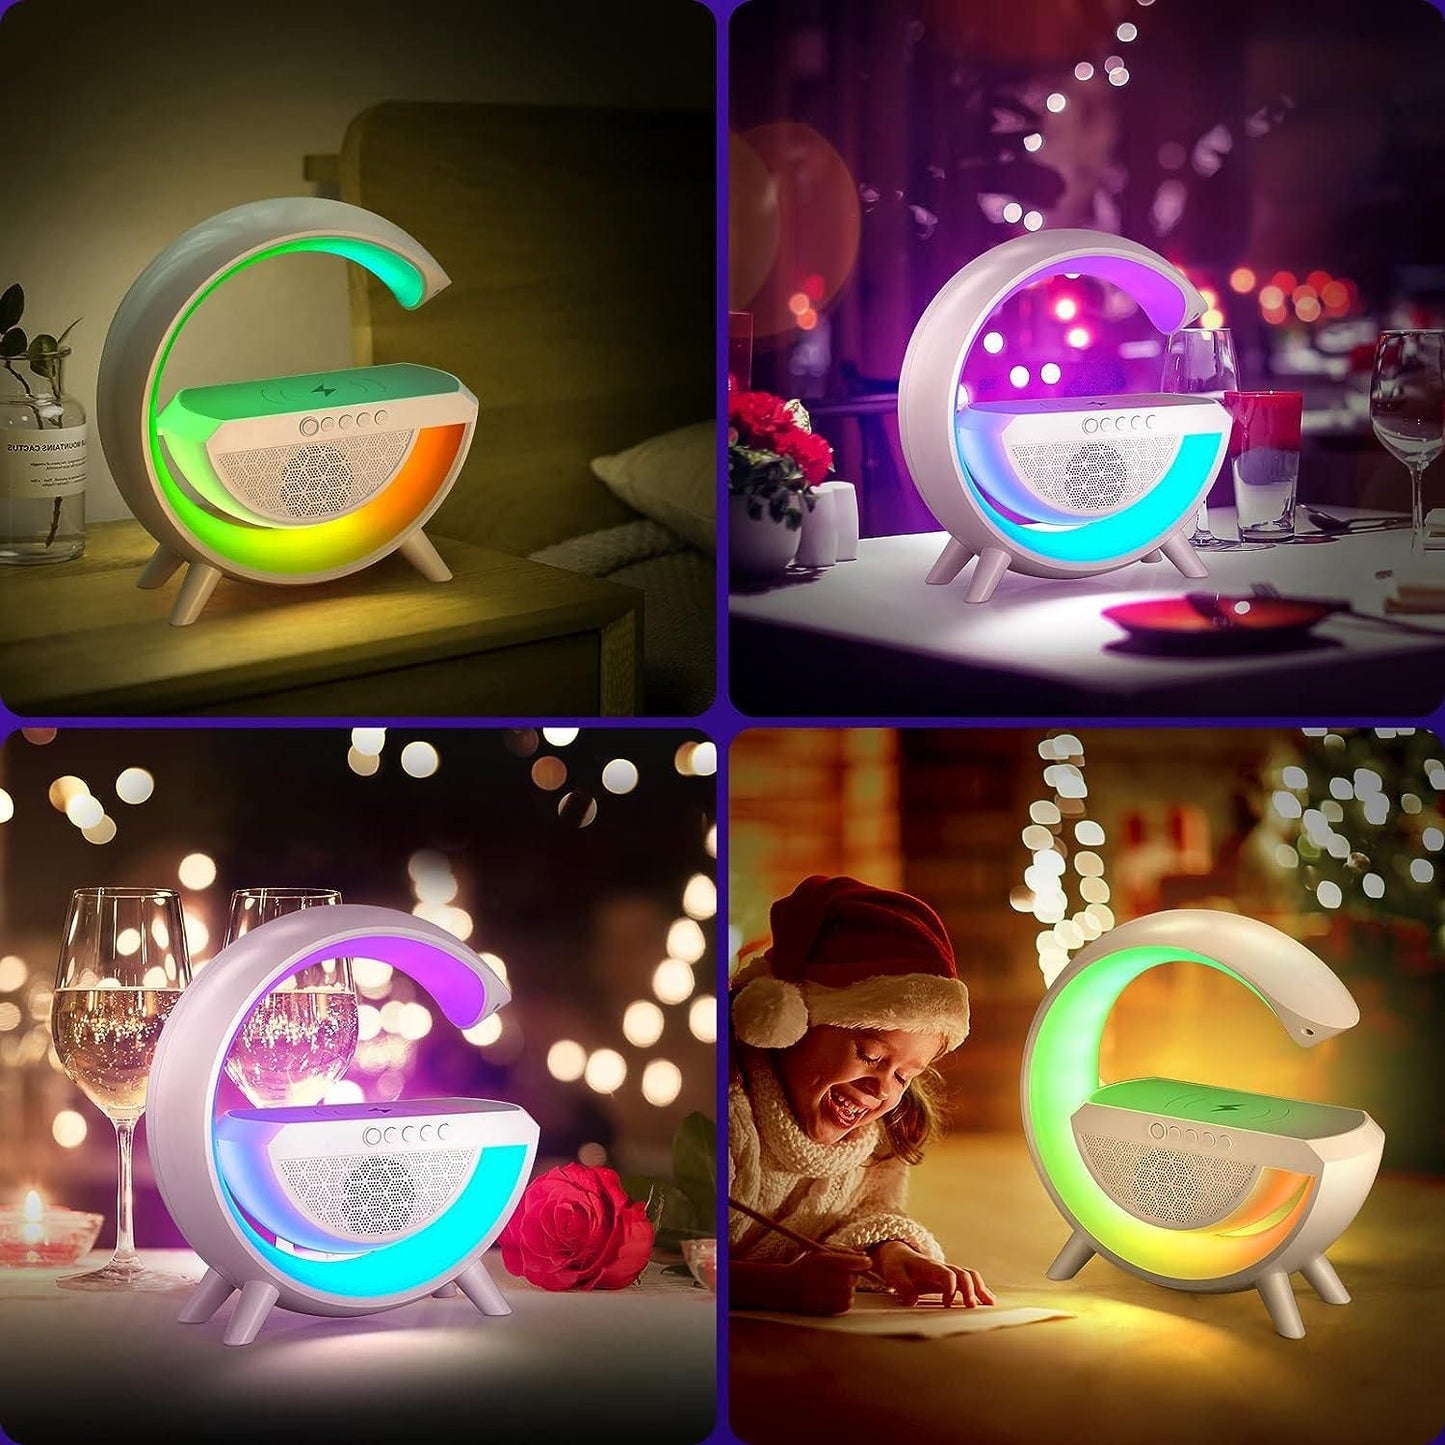 Shoppie® - Wireless Charging Atmosphere Lamp with Bluetooth Speaker™